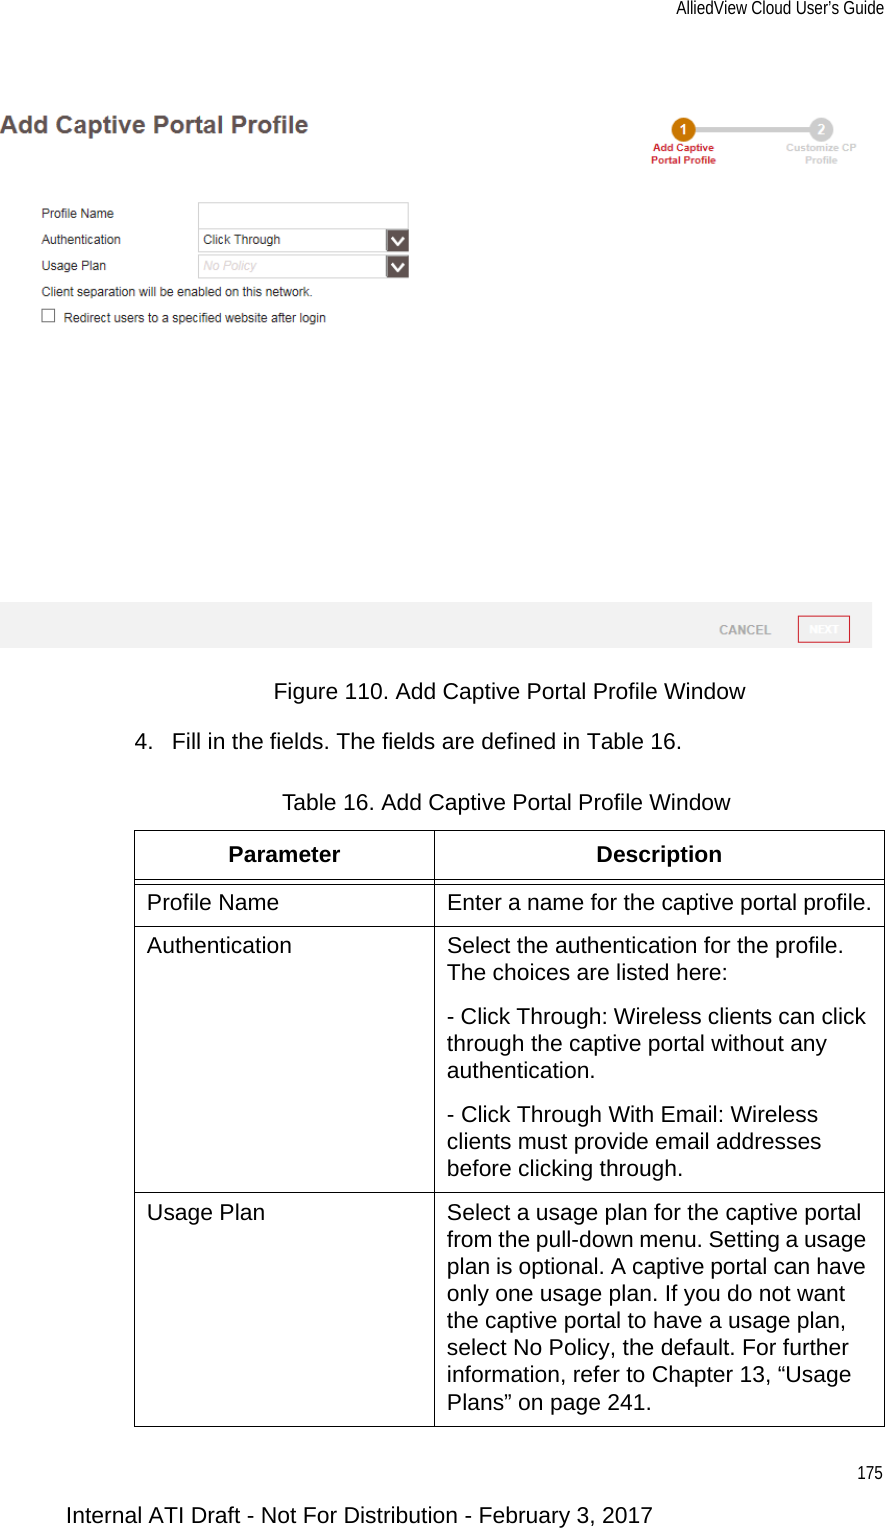 AlliedView Cloud User’s Guide175Figure 110. Add Captive Portal Profile Window4. Fill in the fields. The fields are defined in Table 16.Table 16. Add Captive Portal Profile WindowParameter DescriptionProfile Name Enter a name for the captive portal profile.Authentication Select the authentication for the profile. The choices are listed here:- Click Through: Wireless clients can click through the captive portal without any authentication.- Click Through With Email: Wireless clients must provide email addresses before clicking through.Usage Plan Select a usage plan for the captive portal from the pull-down menu. Setting a usage plan is optional. A captive portal can have only one usage plan. If you do not want the captive portal to have a usage plan, select No Policy, the default. For further information, refer to Chapter 13, “Usage Plans” on page 241.Internal ATI Draft - Not For Distribution - February 3, 2017